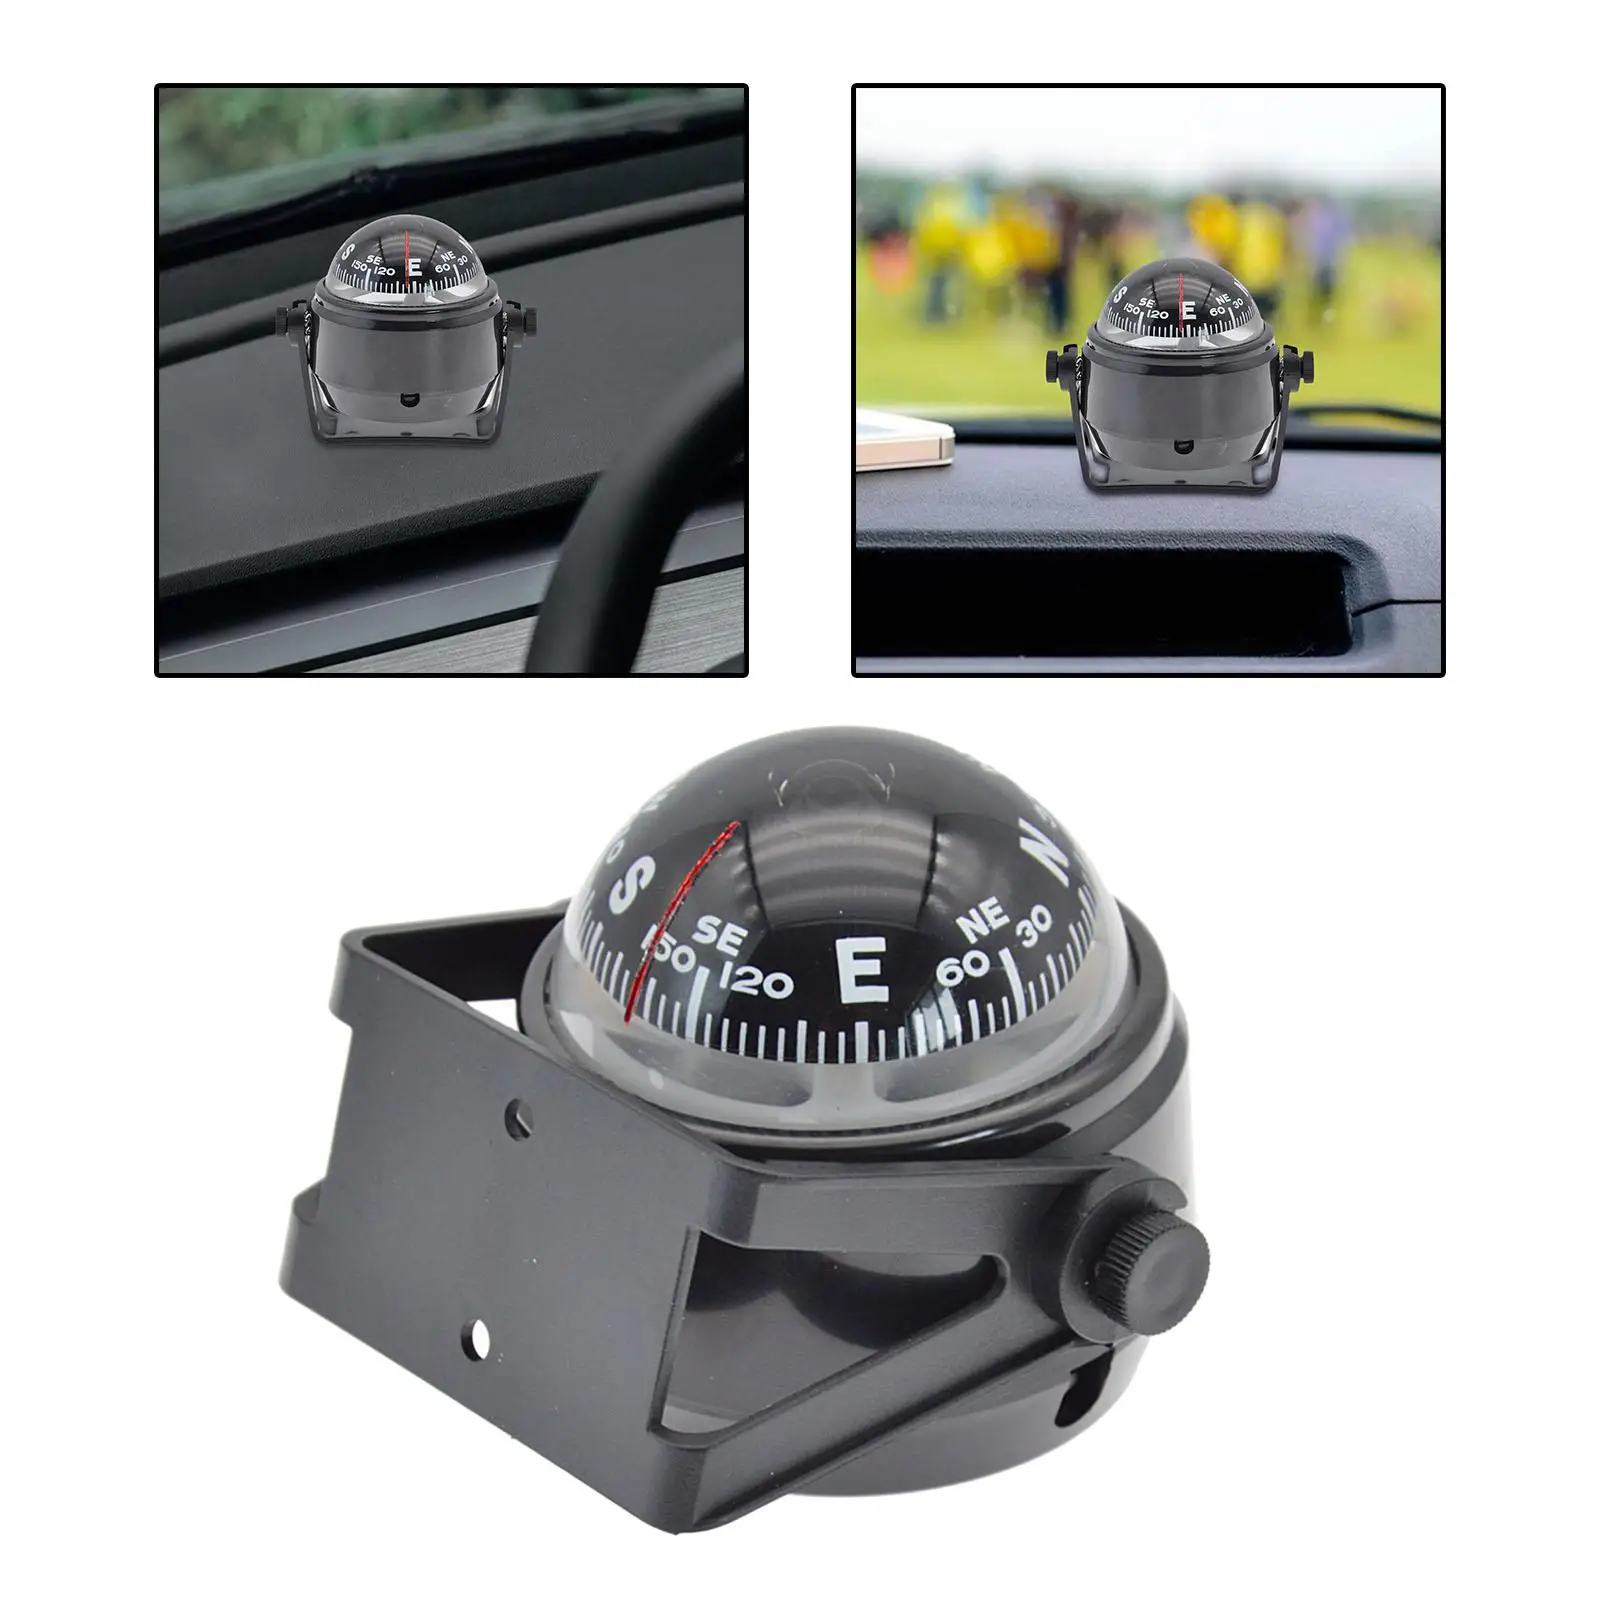 Car Compass Ball High Precision  Automotive Navigation Direction Pointing  Compass for Boat Marine,Camping Sports,Boating